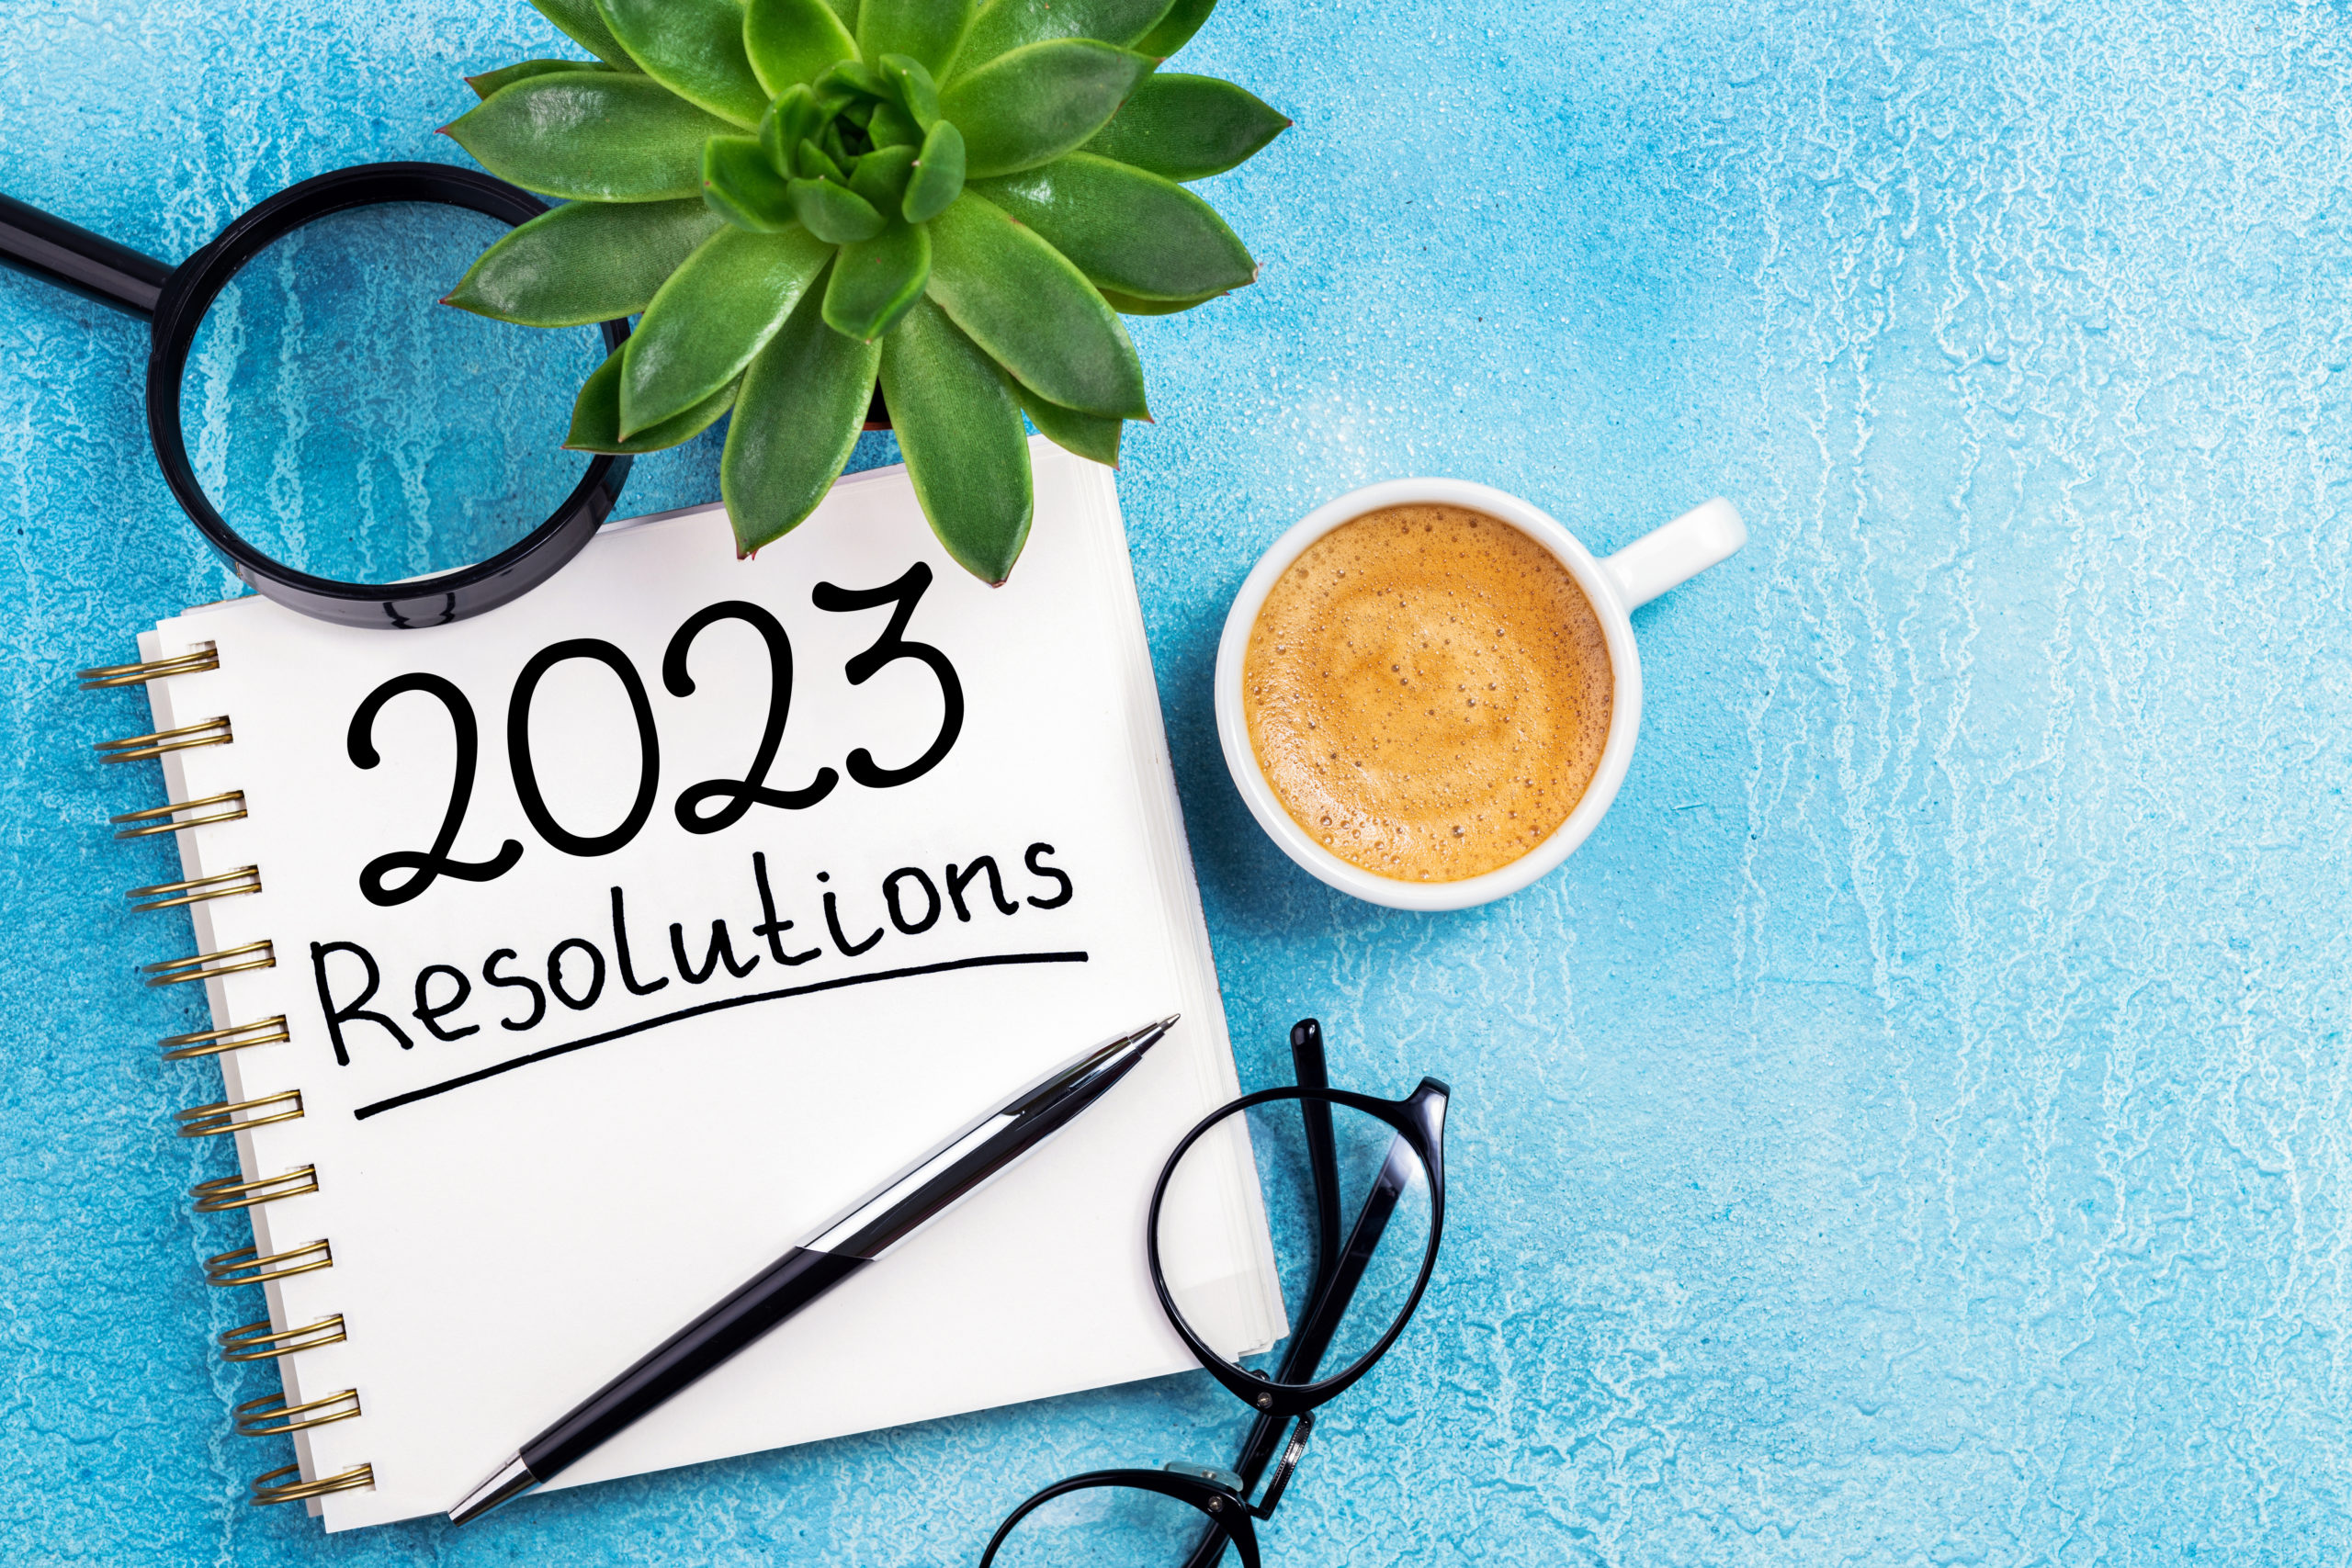 6 New Year’s Resolutions for Locum Tenens Providers